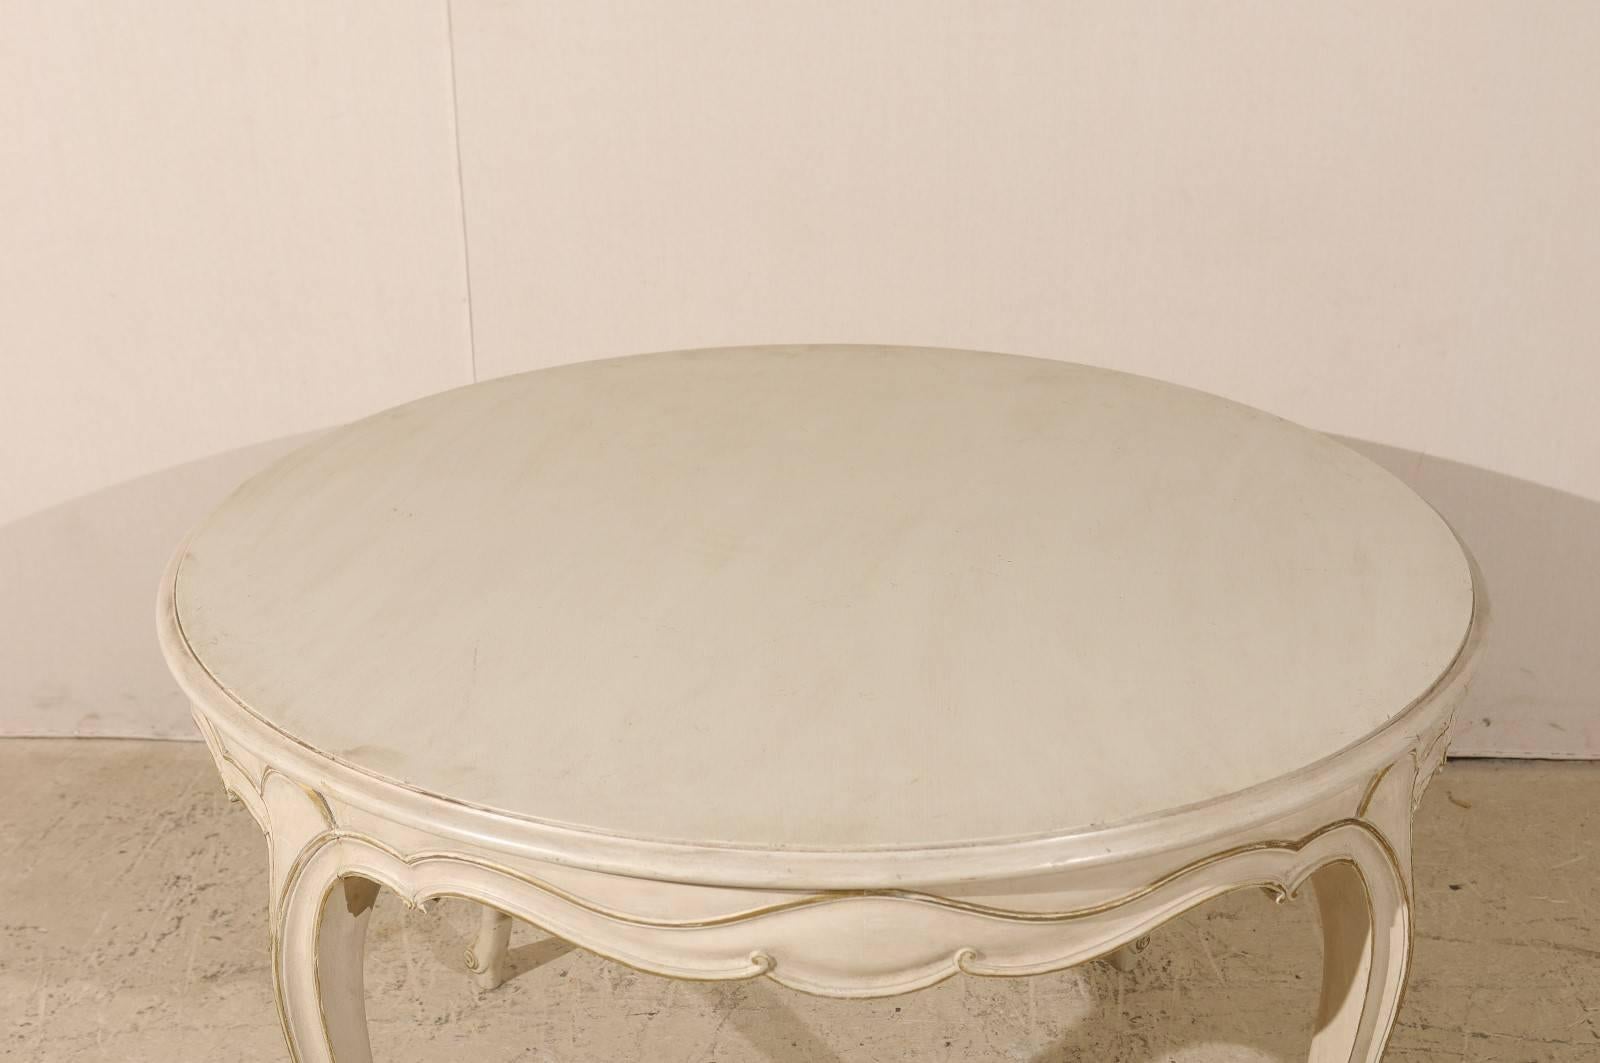 20th Century French Louis XV Wood Round Top Centre Table, Neutral Beige with Gilded Accents